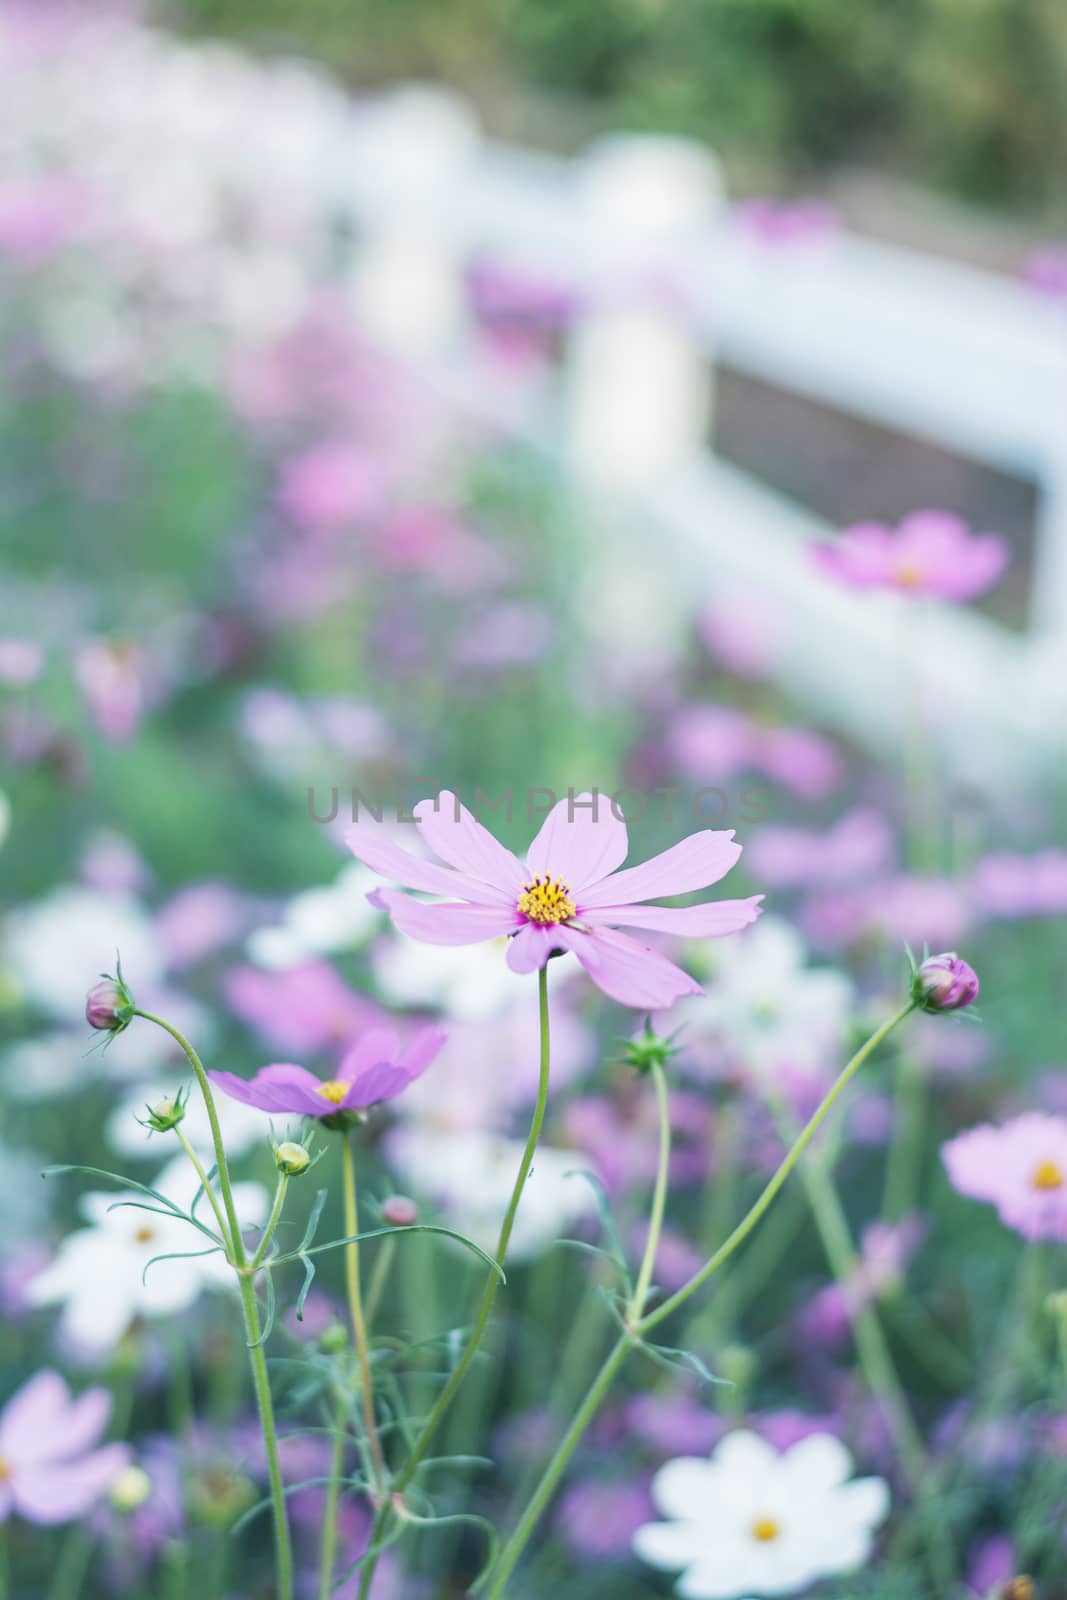 Pink, white, purple and red cosmos flowers in the garden, soft focus and retro film color tone